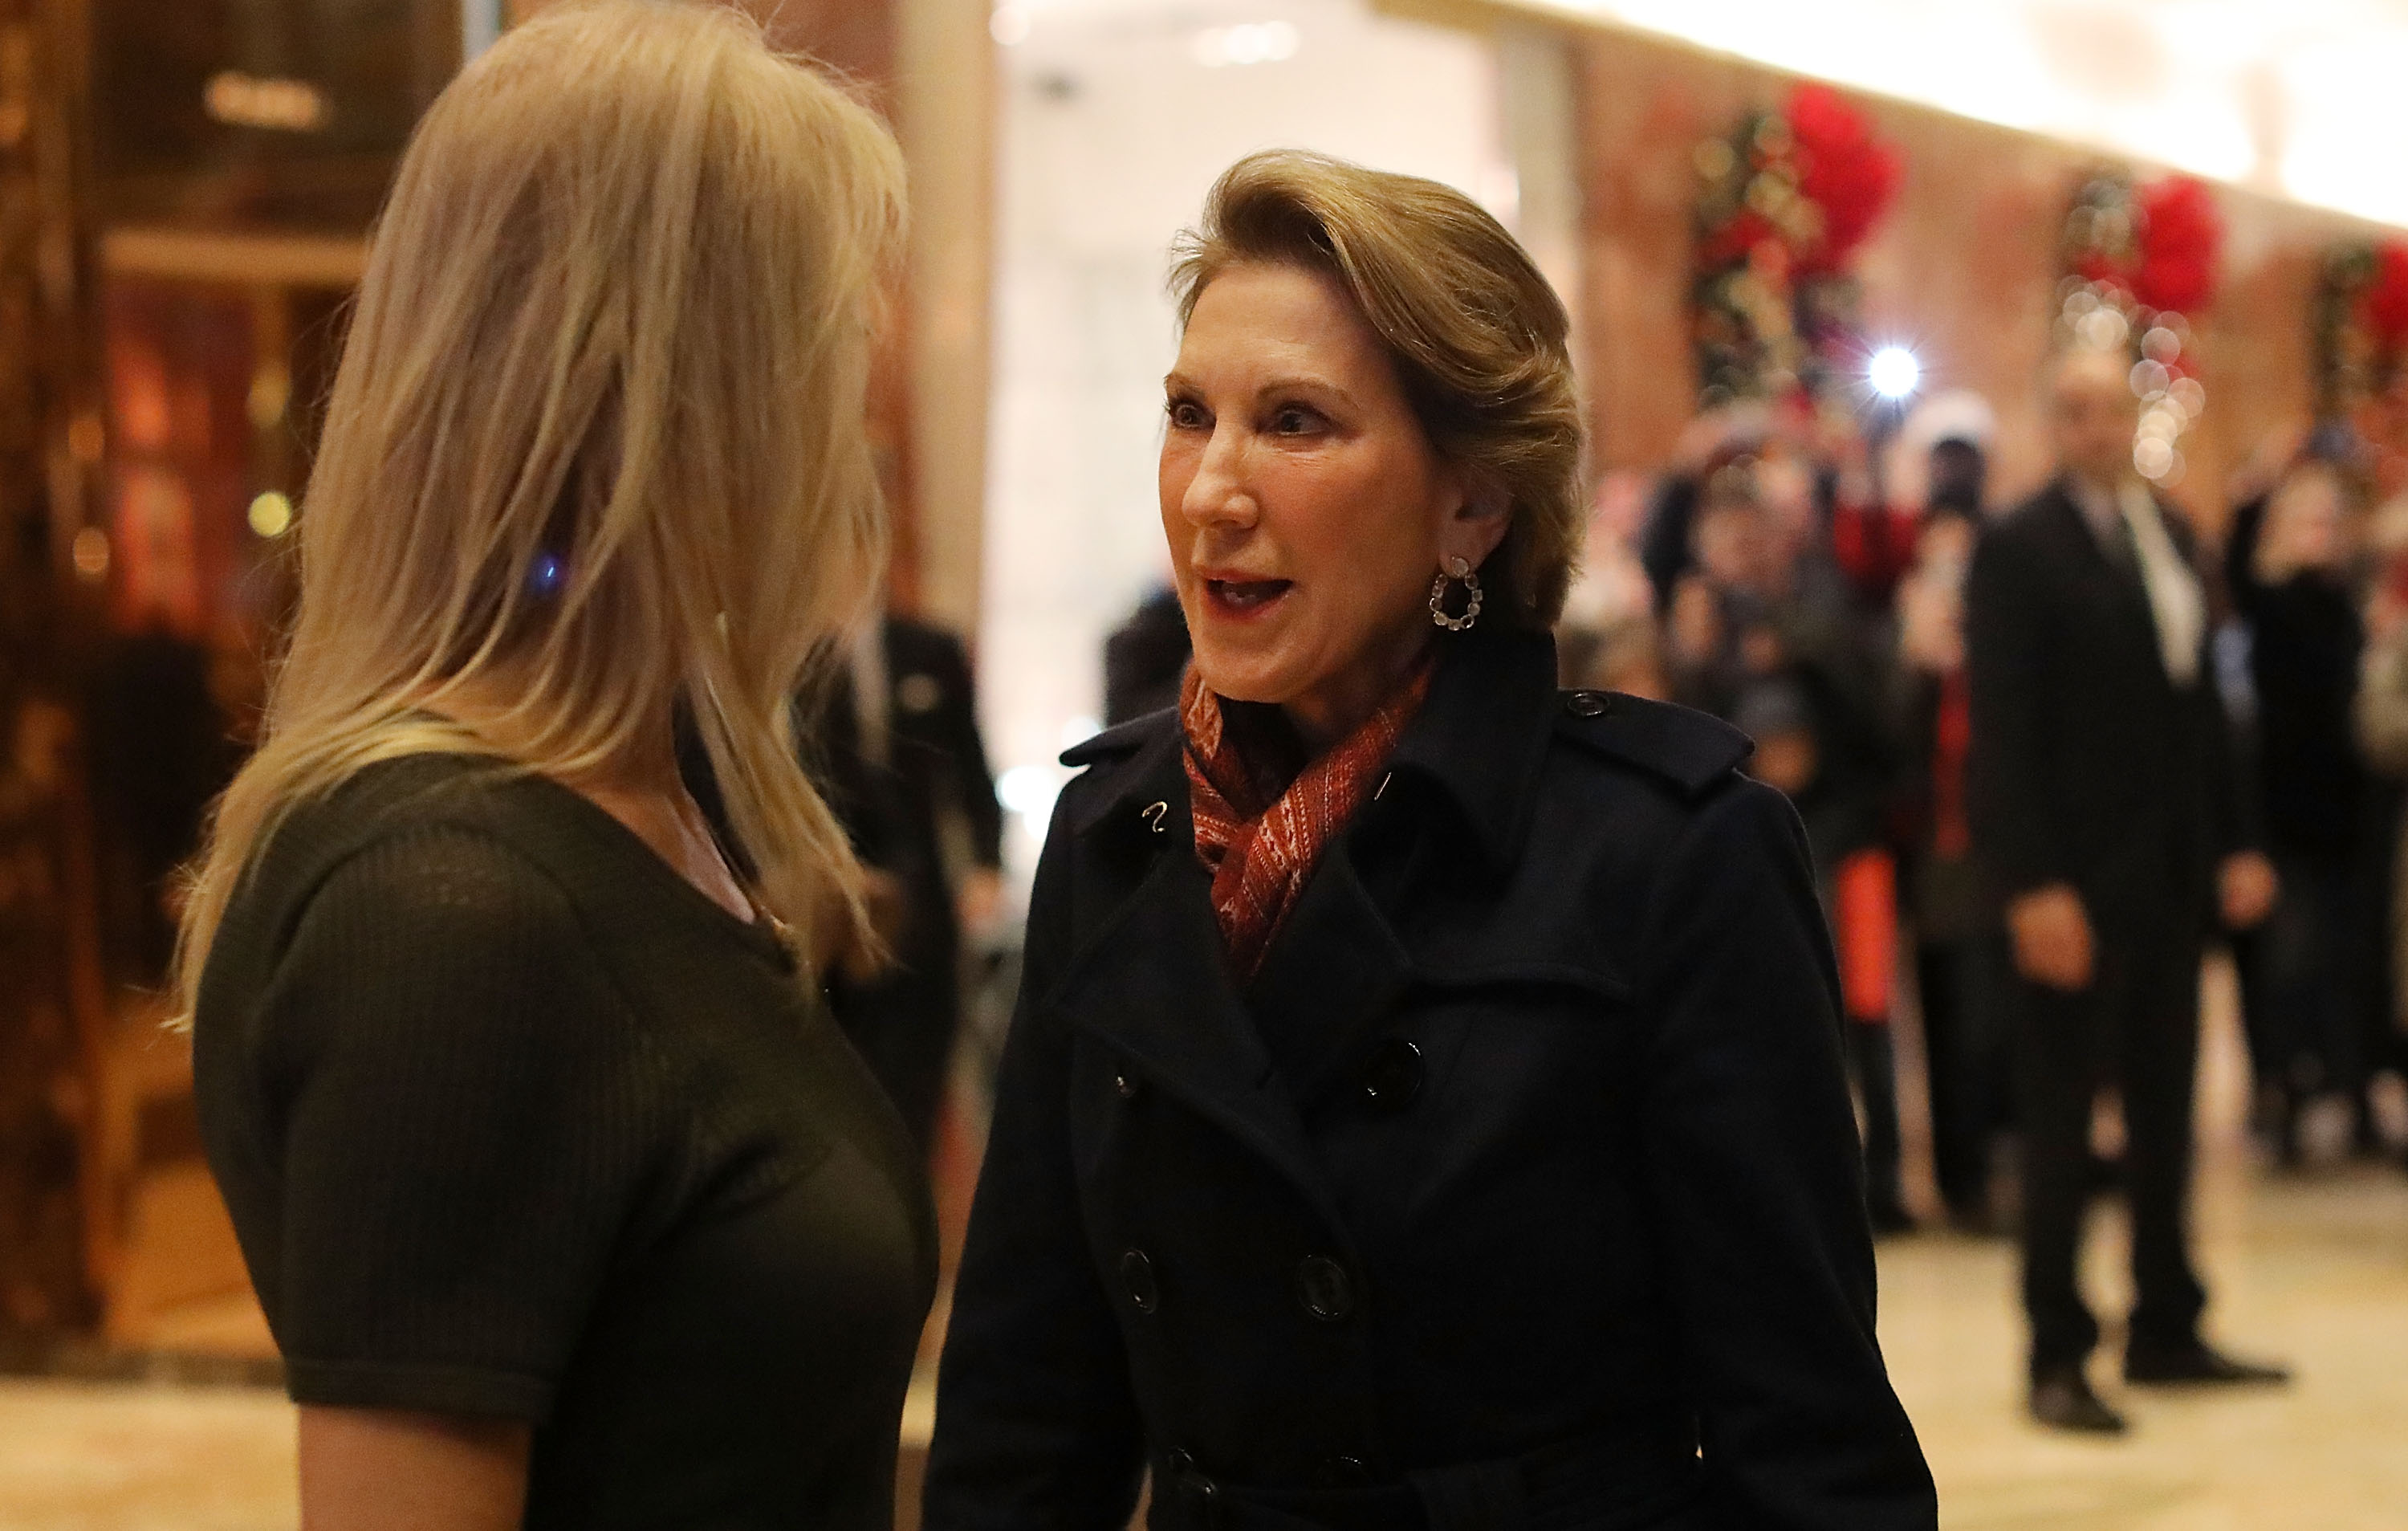 NEW YORK, NY - DECEMBER 12: Former Republican presidential candidate Carly Fiorina speaks to political strategist Kellyanne Conway after a meeting at Trump Tower on December 12, 2016 in New York City. President-elect Donald Trump continues to hold meetings with potential members of his cabinet at his office. (Photo by Spencer Platt/Getty Images)